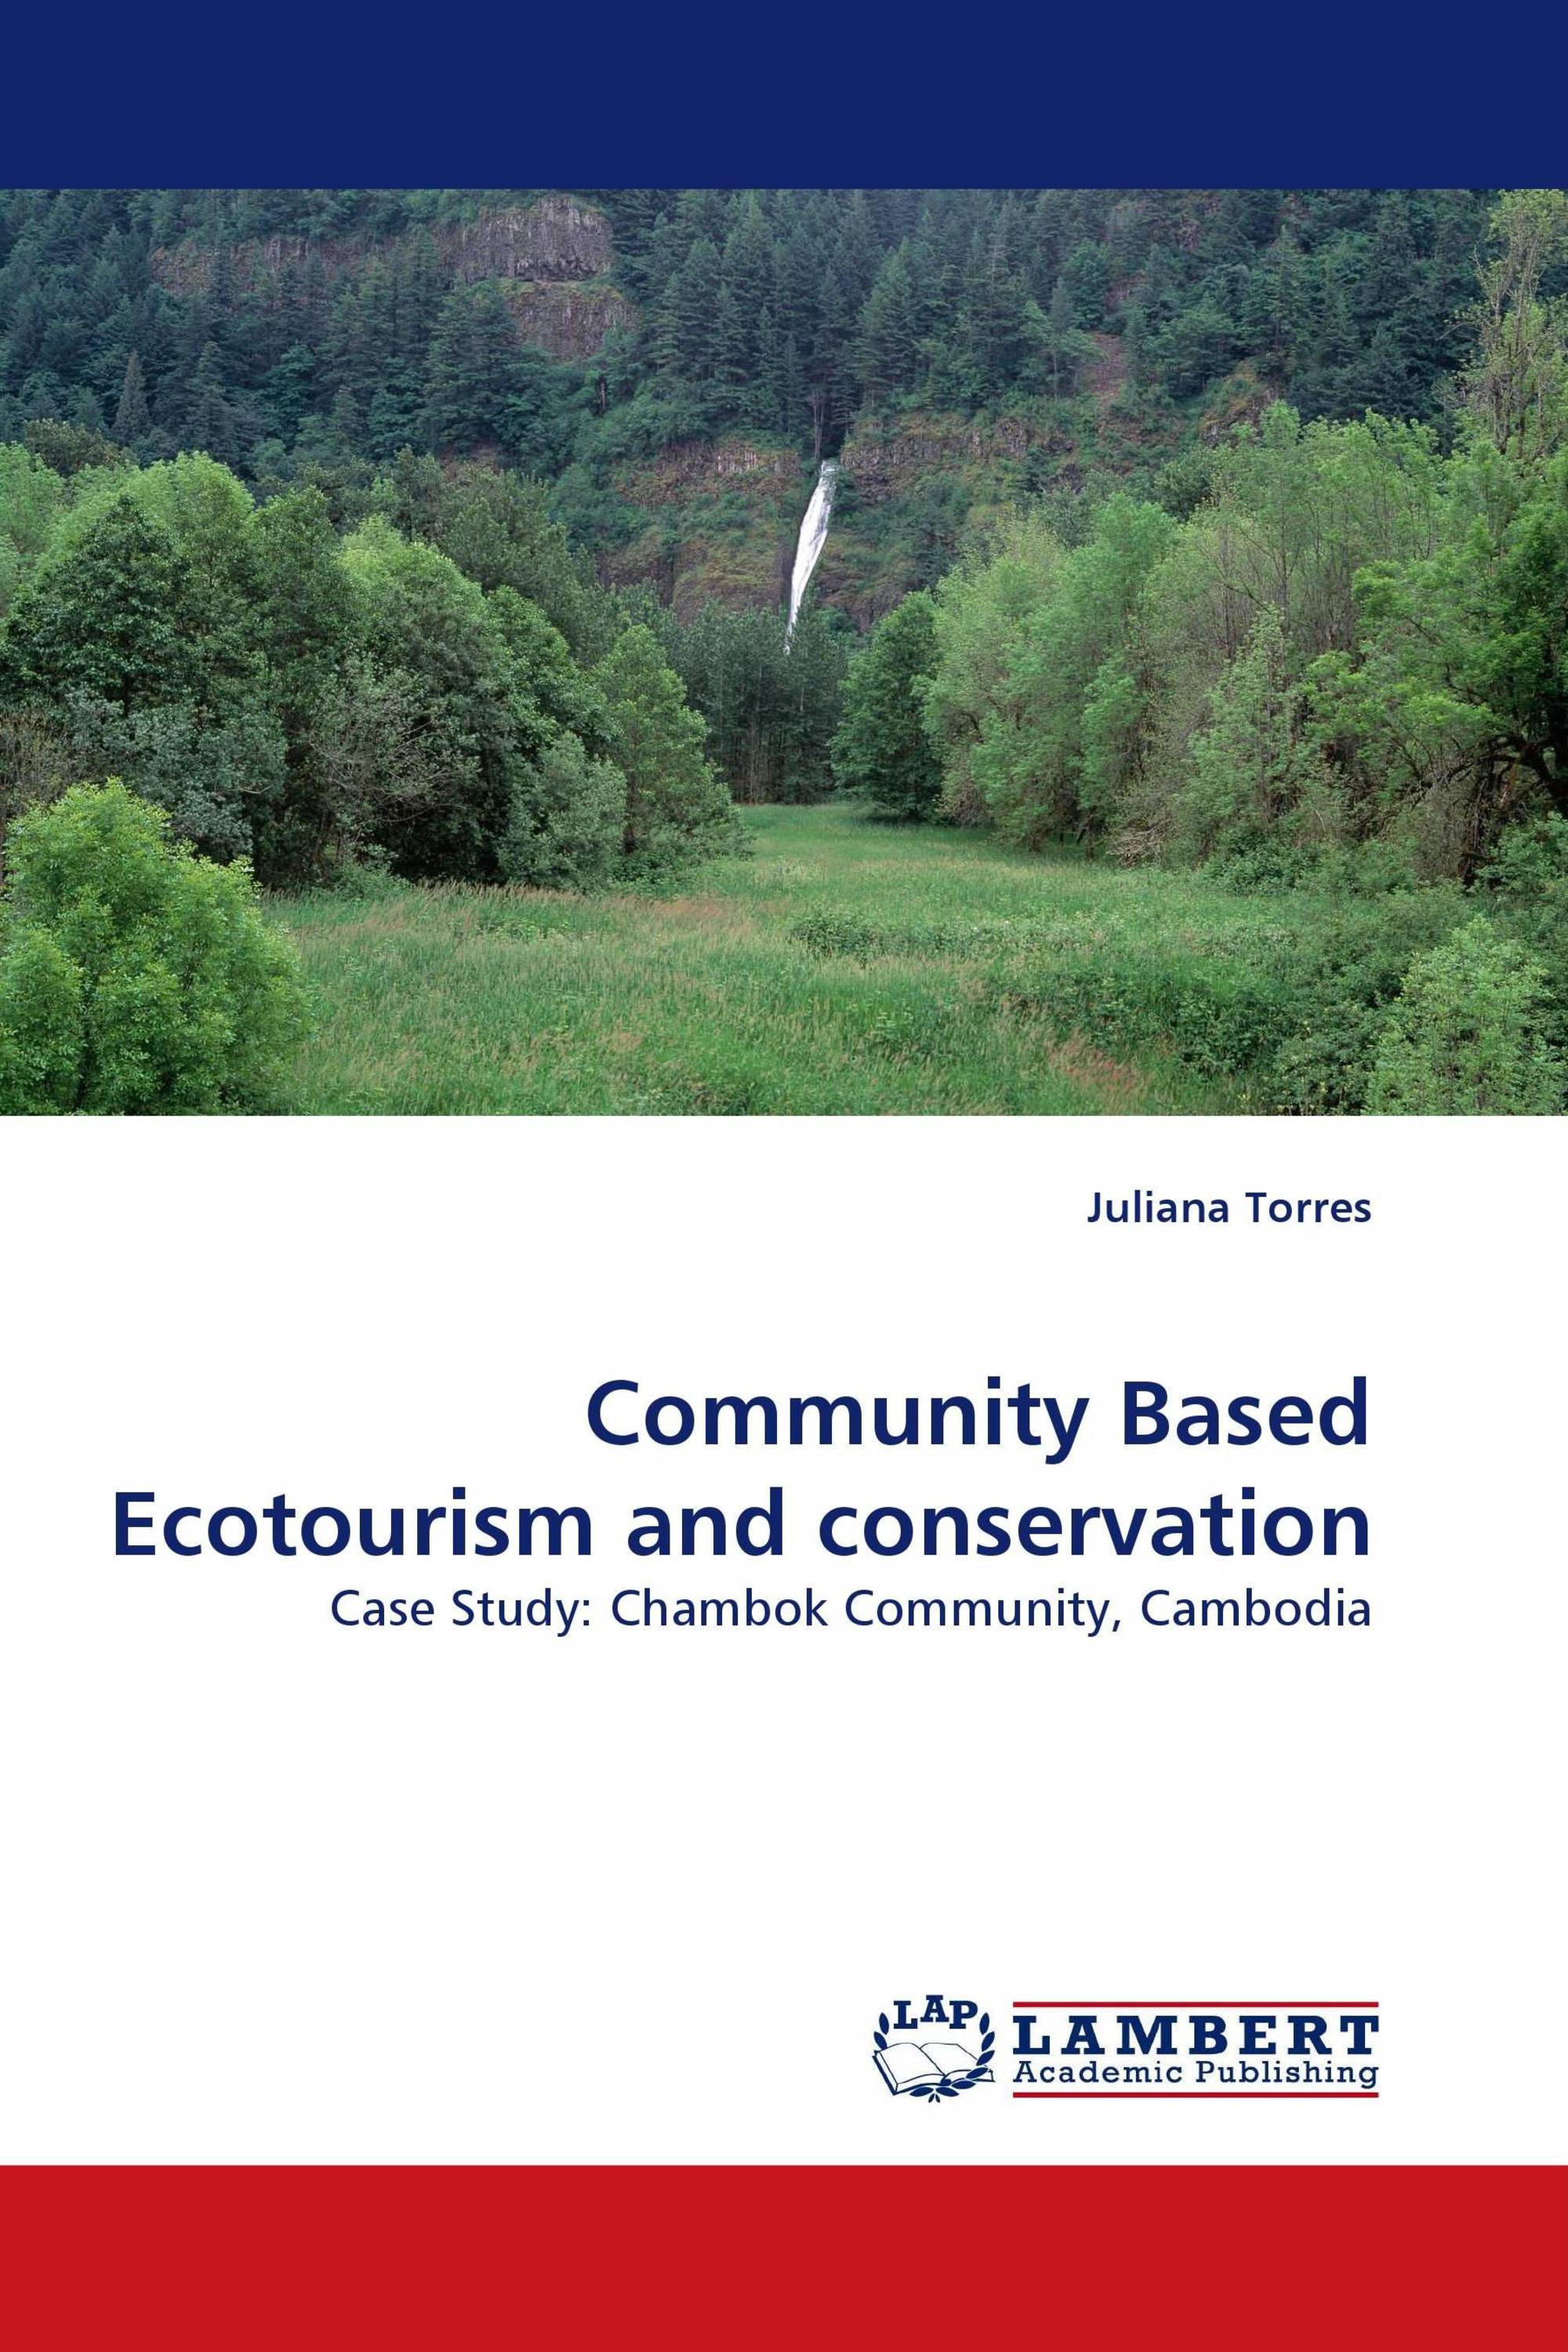 Community Based Ecotourism and conservation